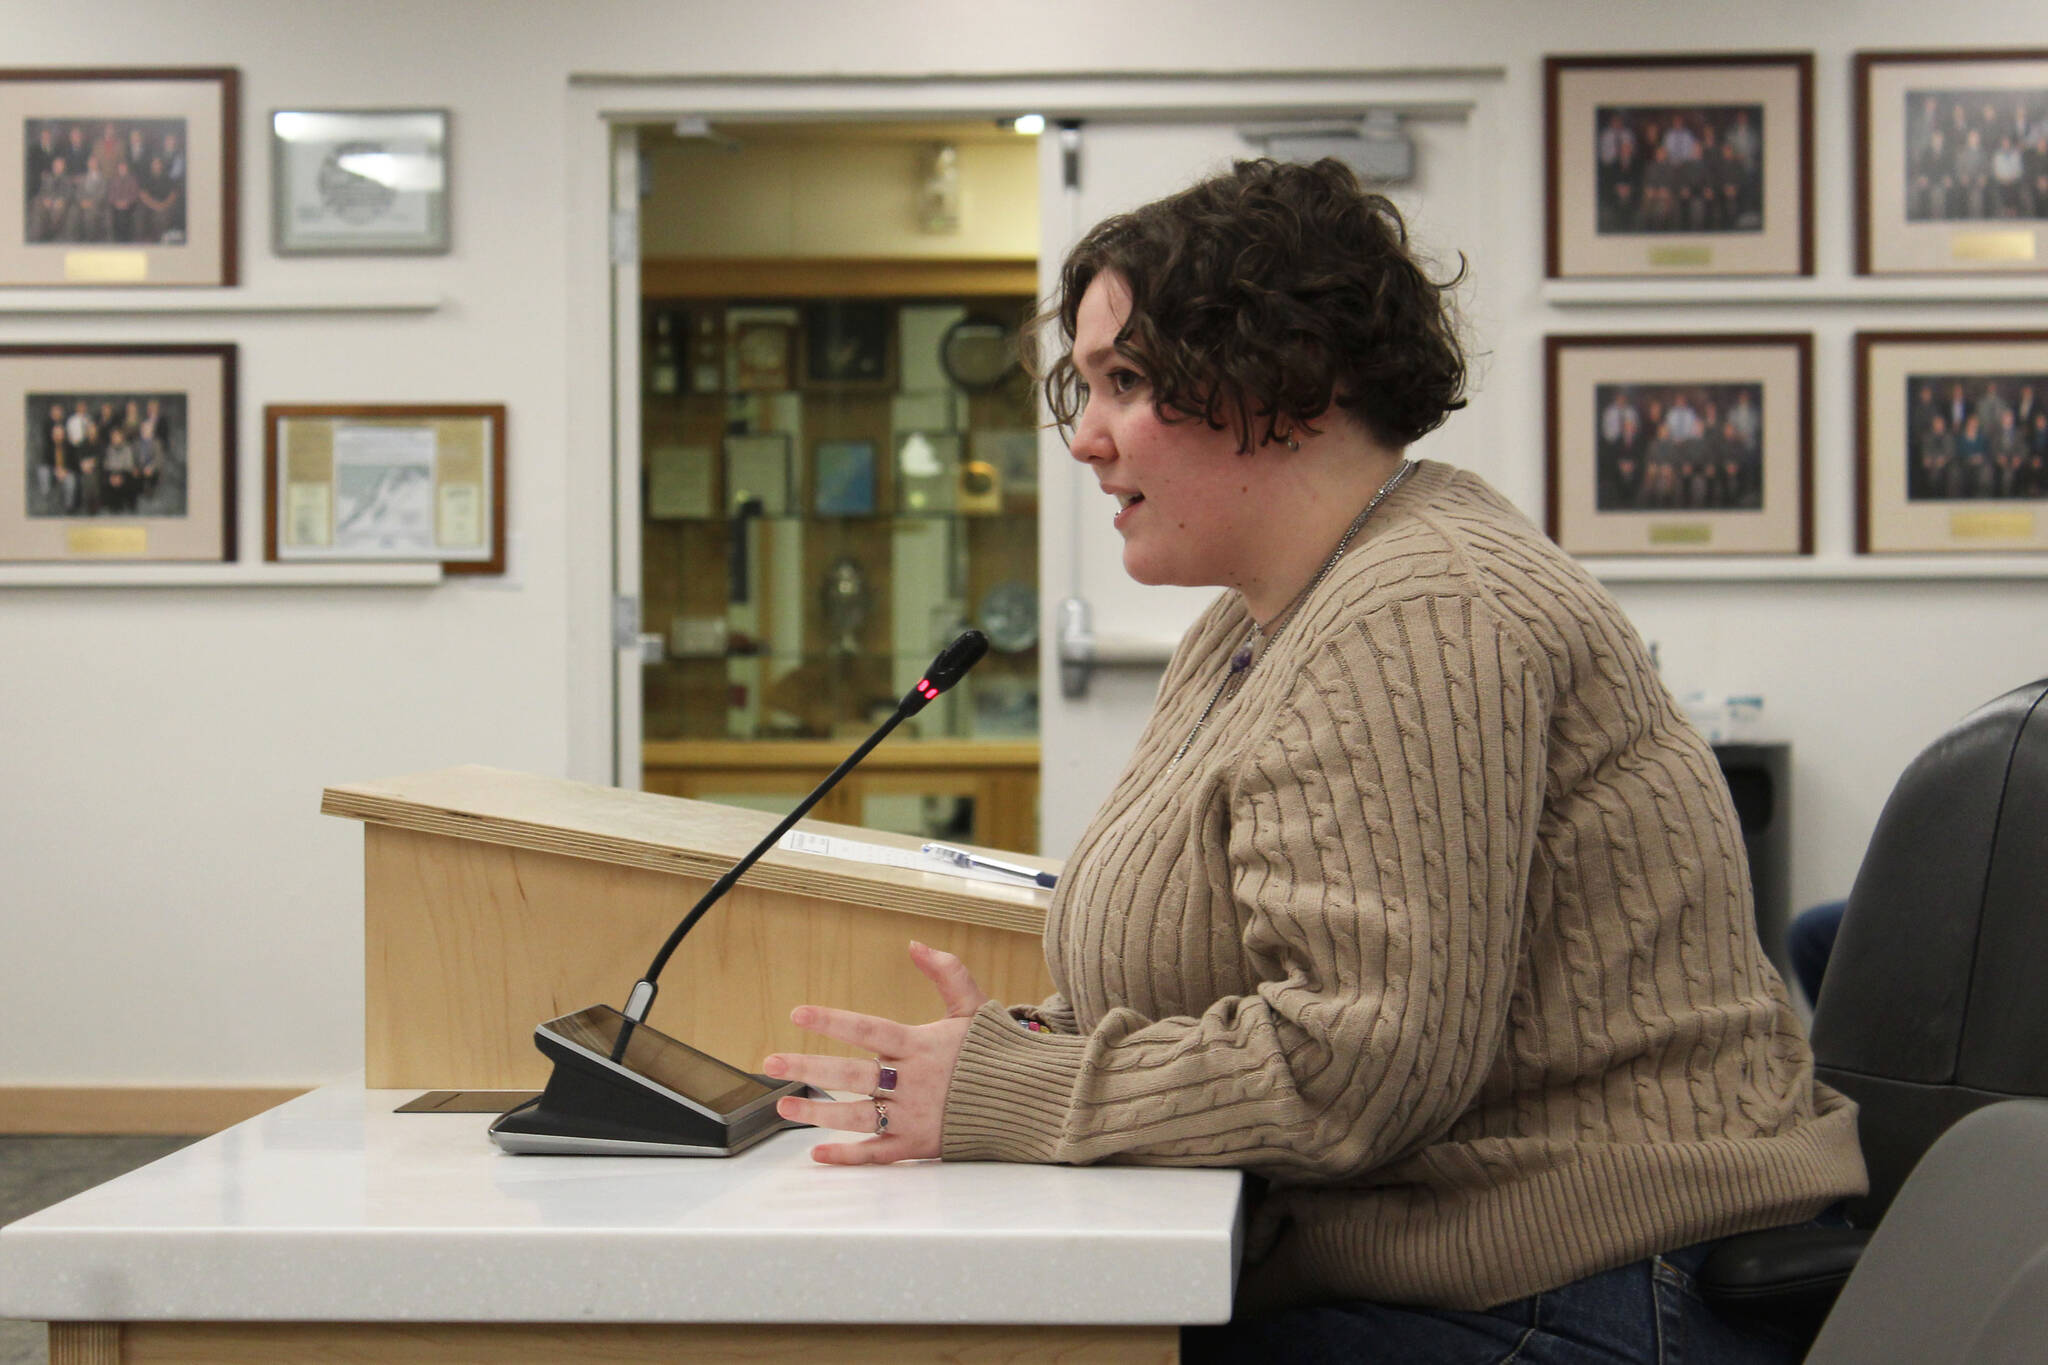 Olivia Ferguson, who is the student representative to the Kenai Peninsula Borough School District Board of Education’s Information Committee speaks during a board meeting on Monday, March 14, 2022 in Soldotna, Alaska. (Ashlyn O’Hara/Peninsula Clarion)